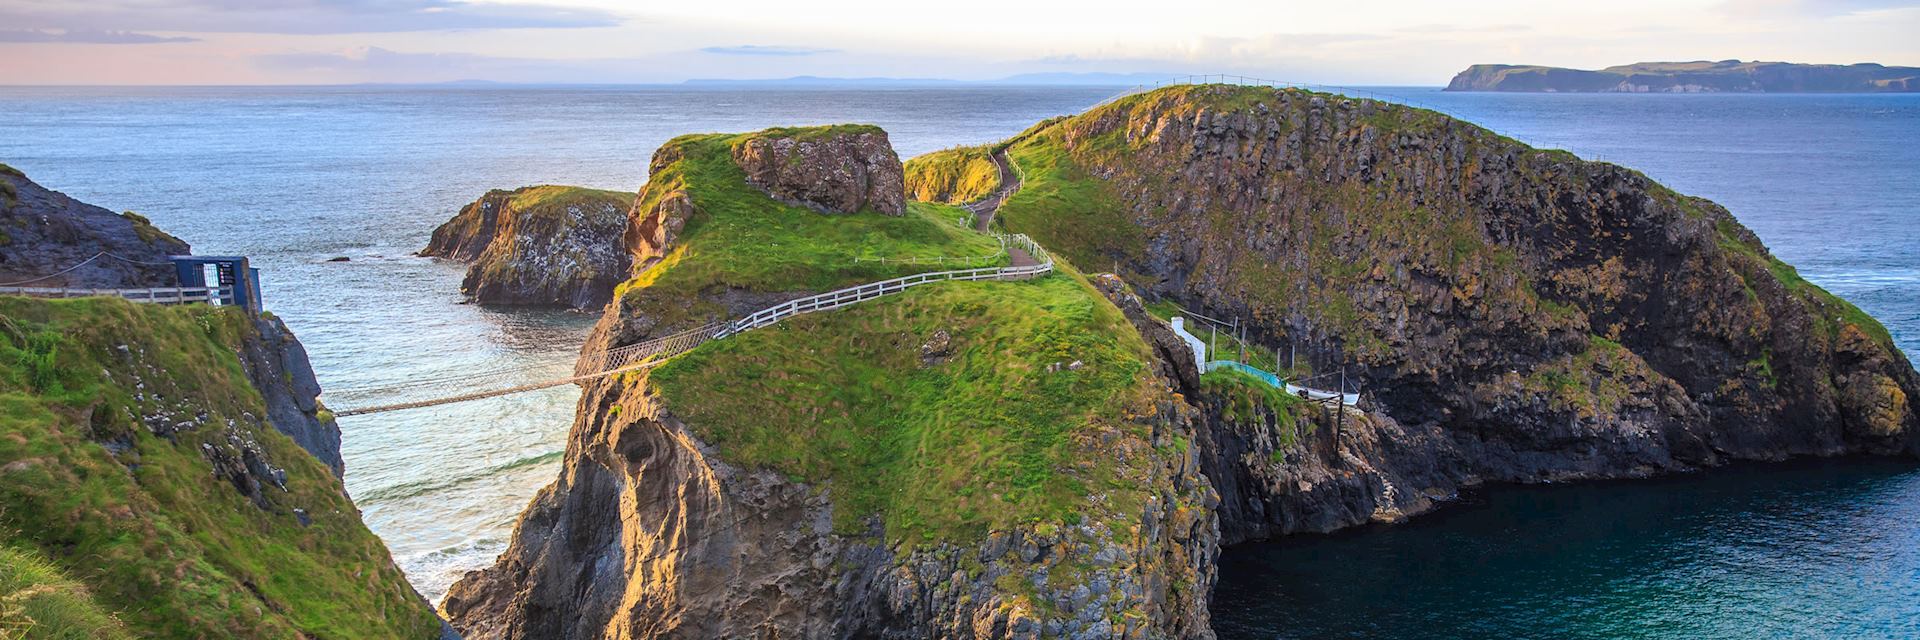 Carrick-a-Rede Rope Bridge, near Ballintoy in County Antrim